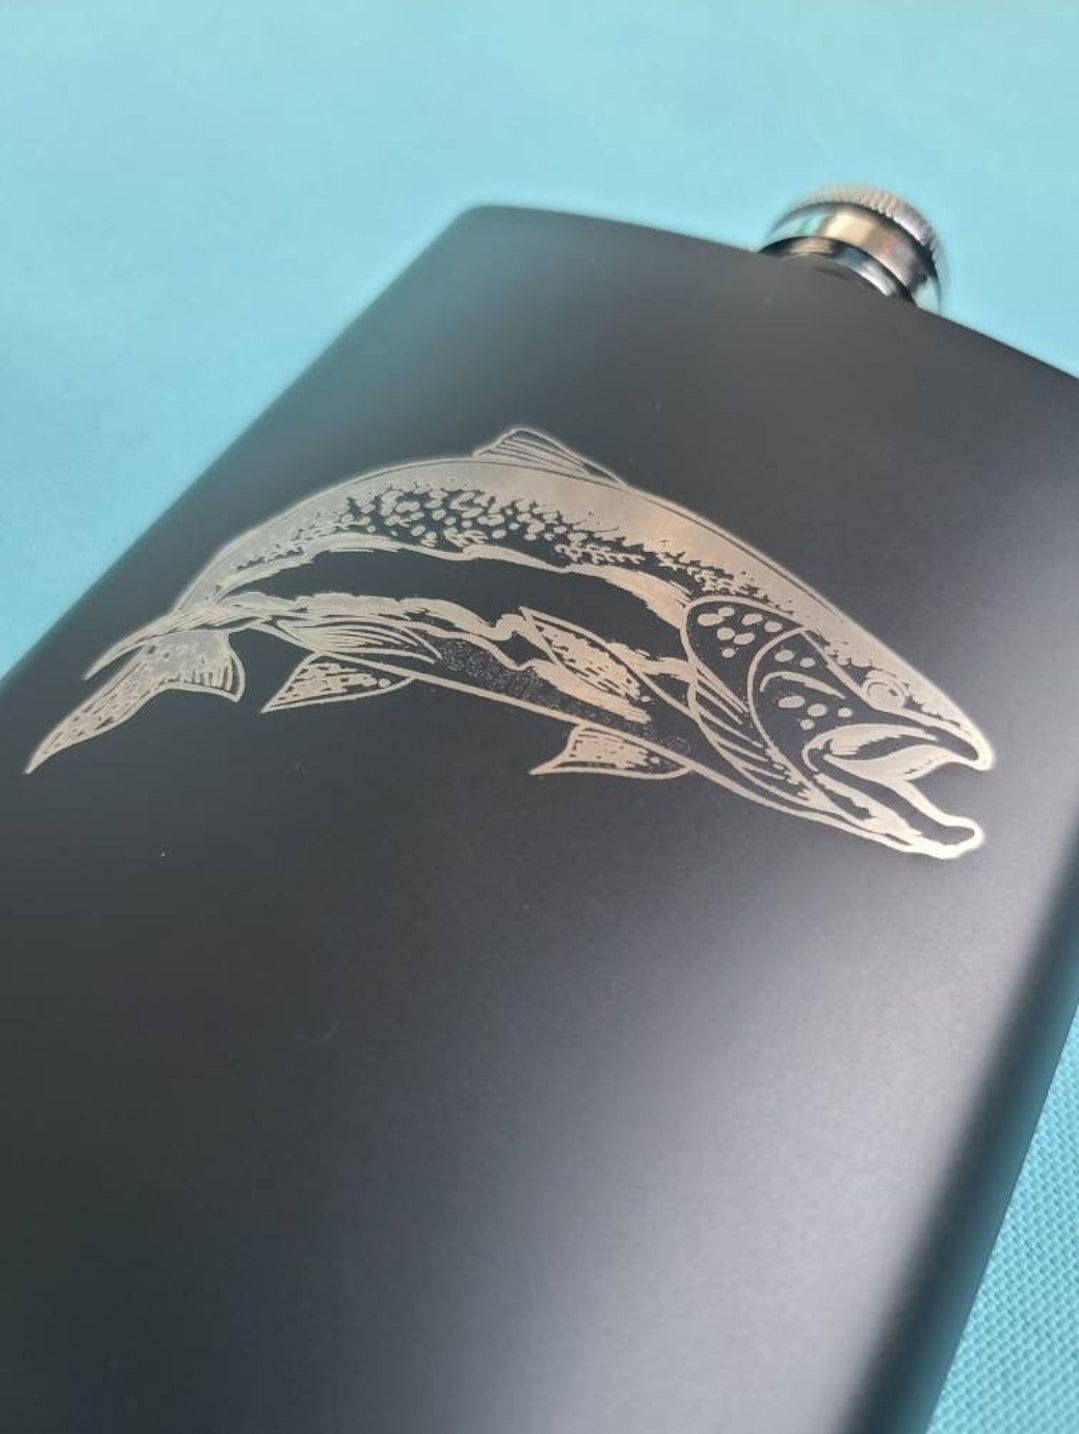 Metal beverage hip flask 8 oz. Black with Trout art fishing themed image